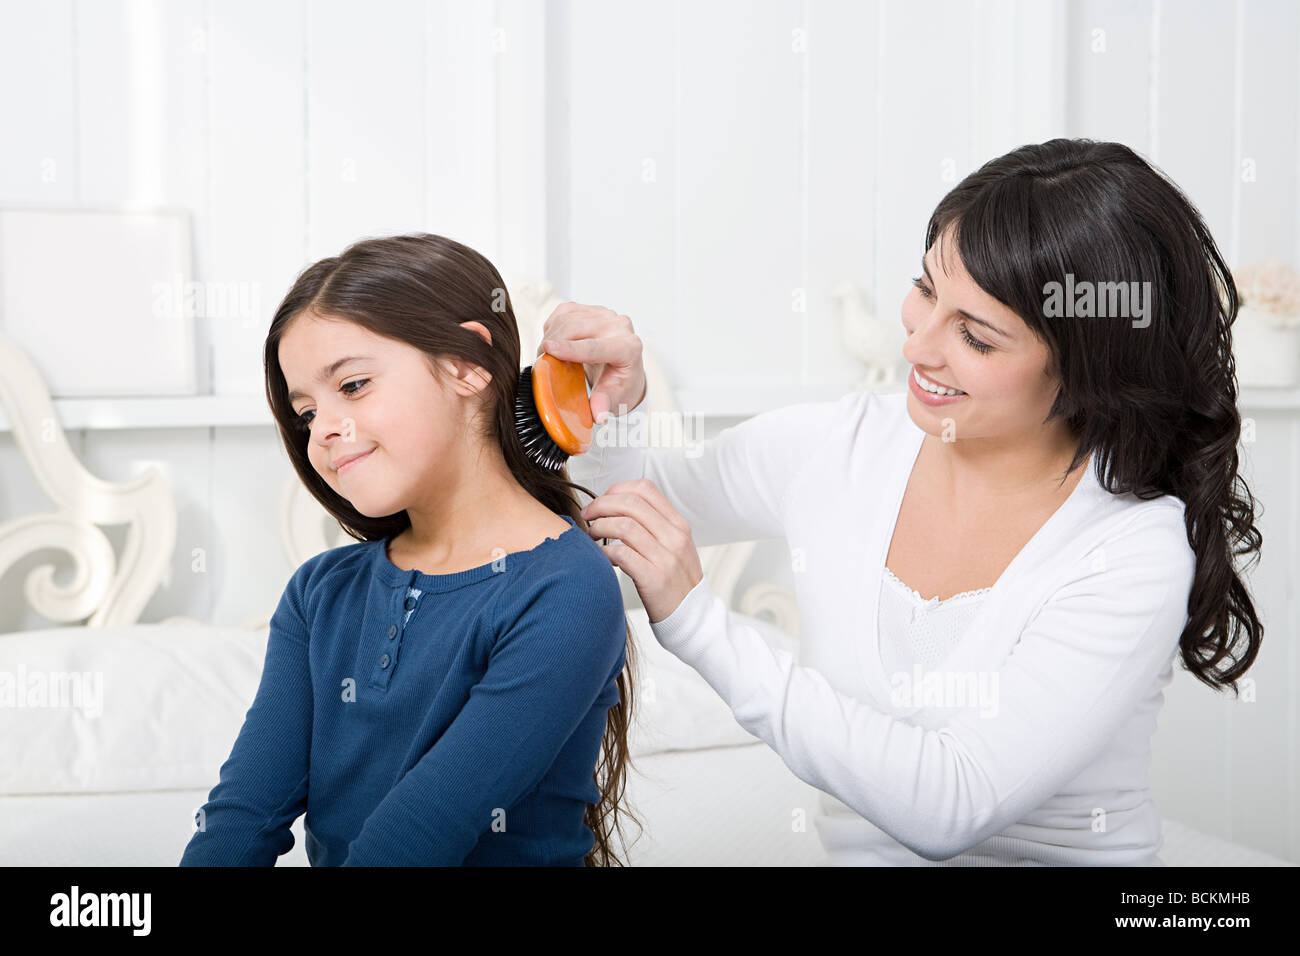 Mother combing daughters hair Stock Photo